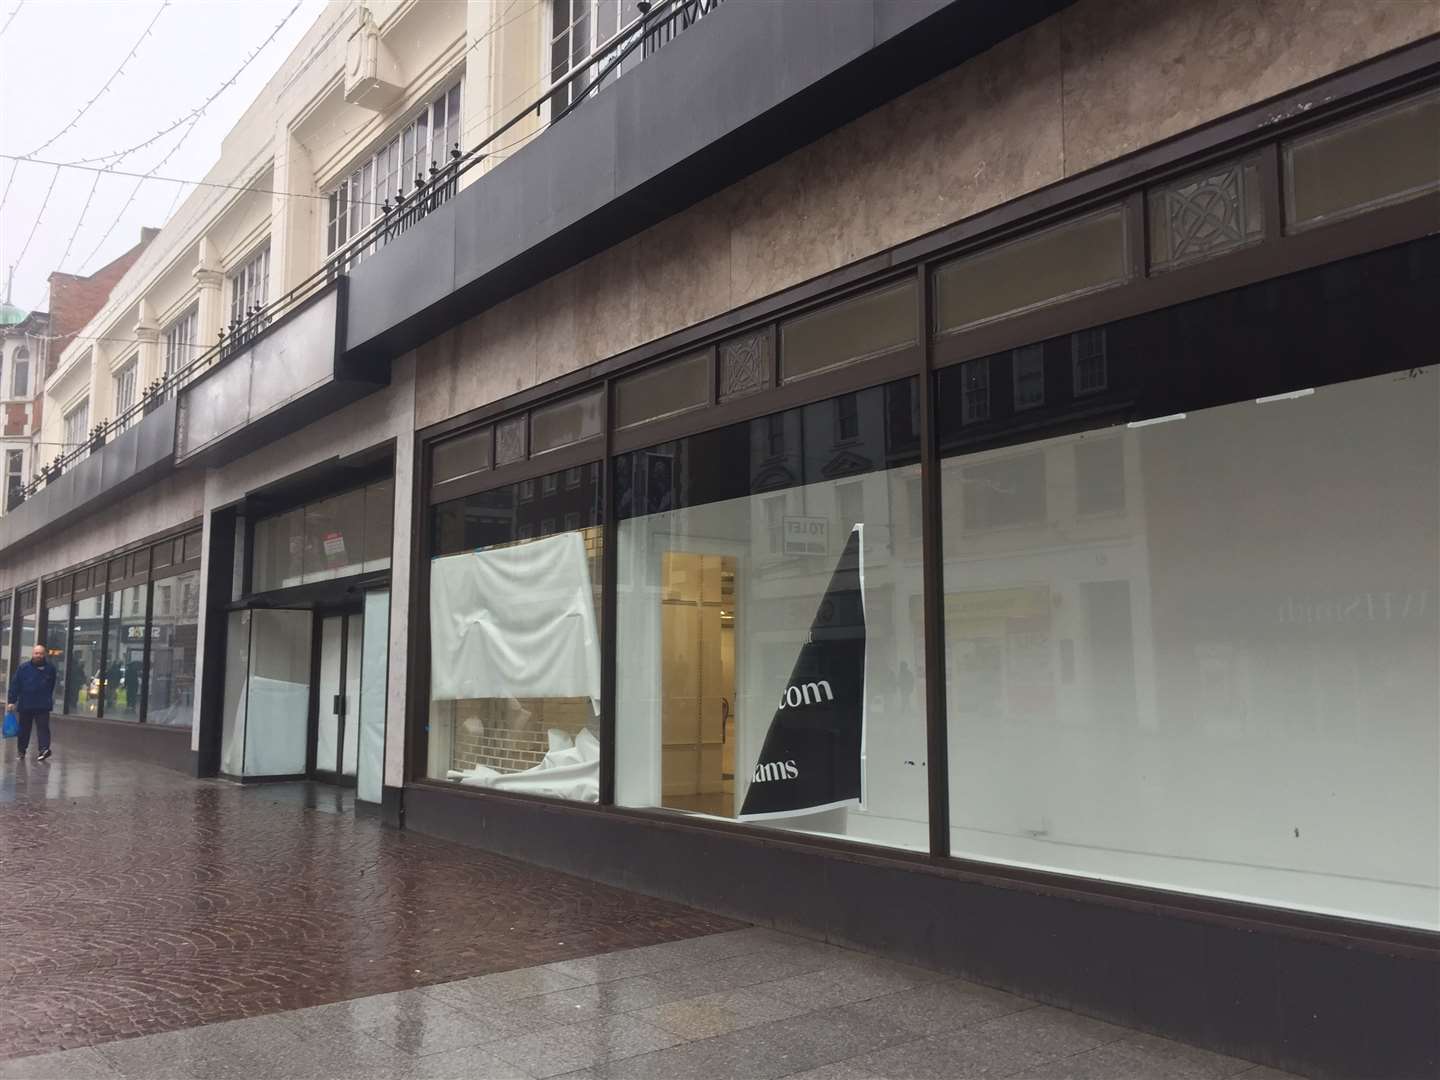 The now-empty Debenhams store in Folkestone has been snapped by the district council